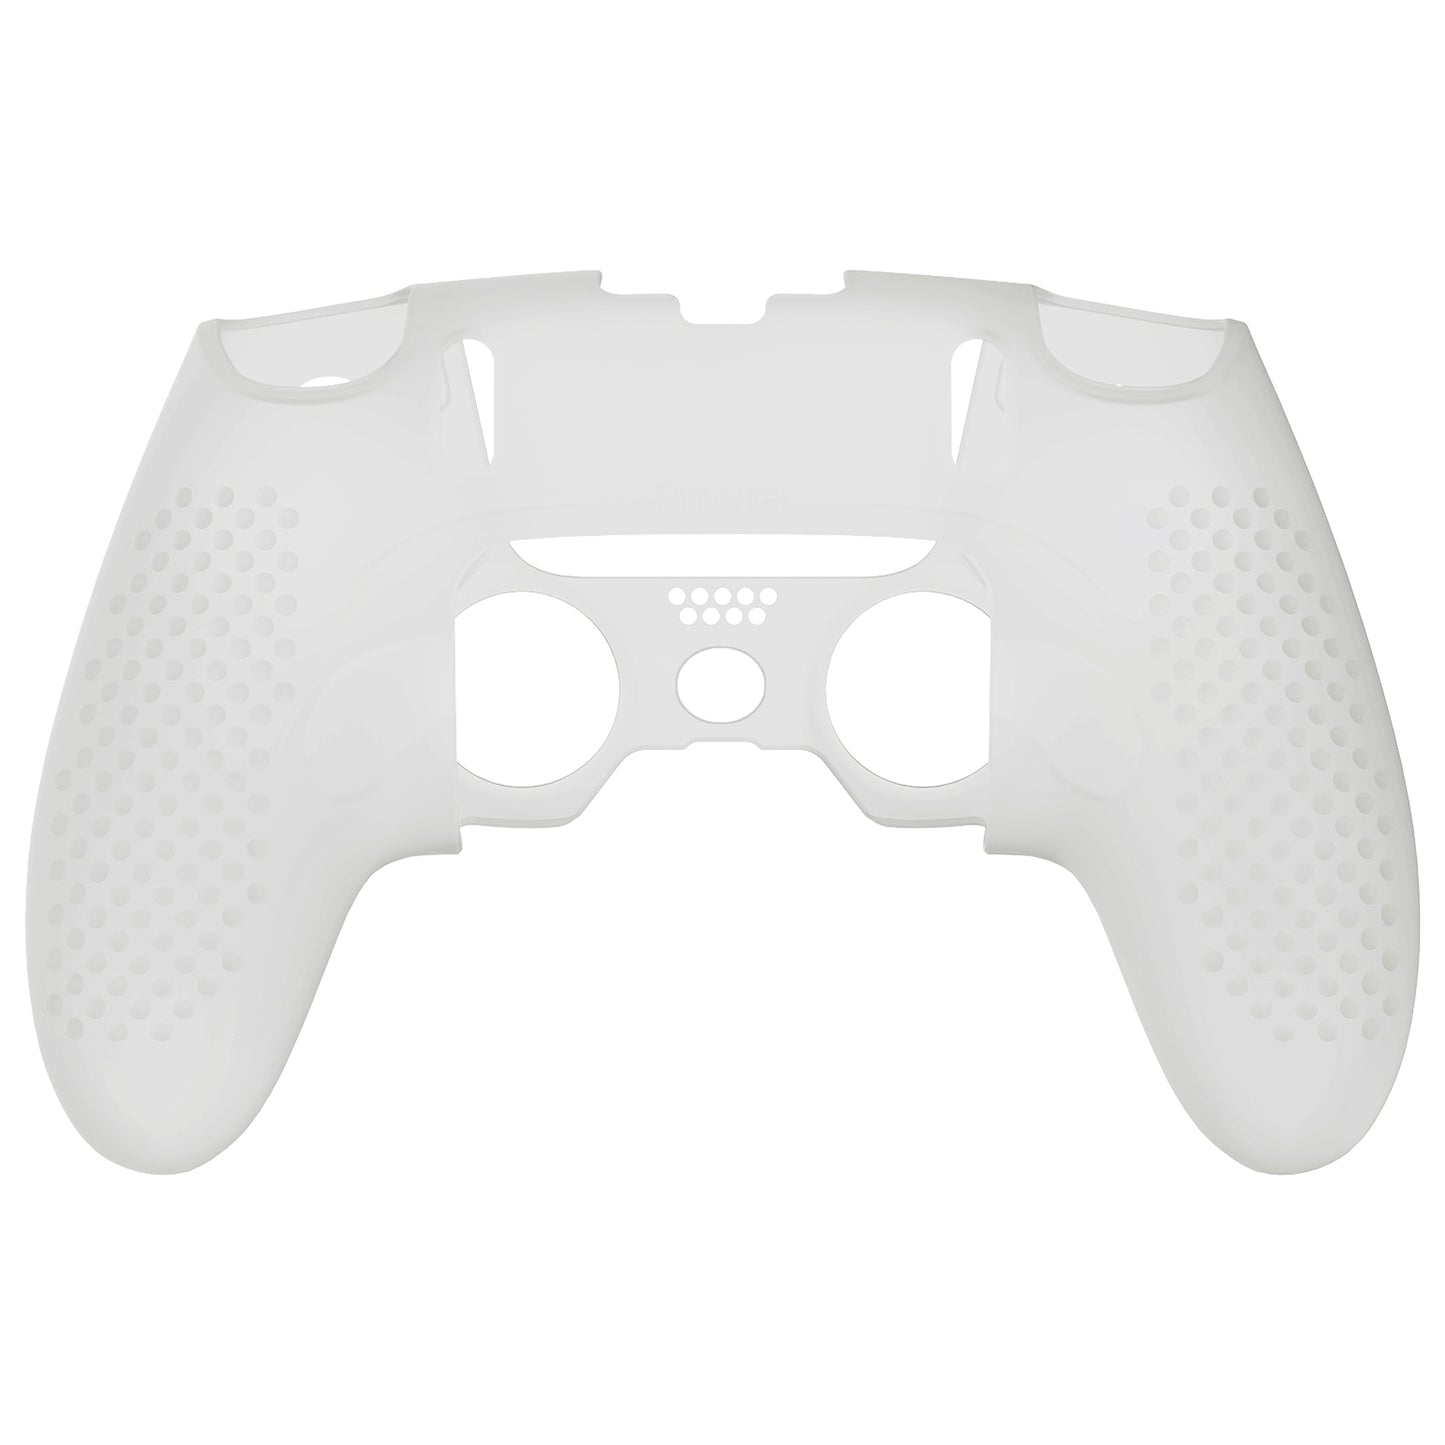 PlayVital 3D Studded Edition Anti-Slip Silicone Cover Case with Thumb Grip Caps for PS5 Edge Controller - Glow in Dark - Green - ETPFP007 PlayVital